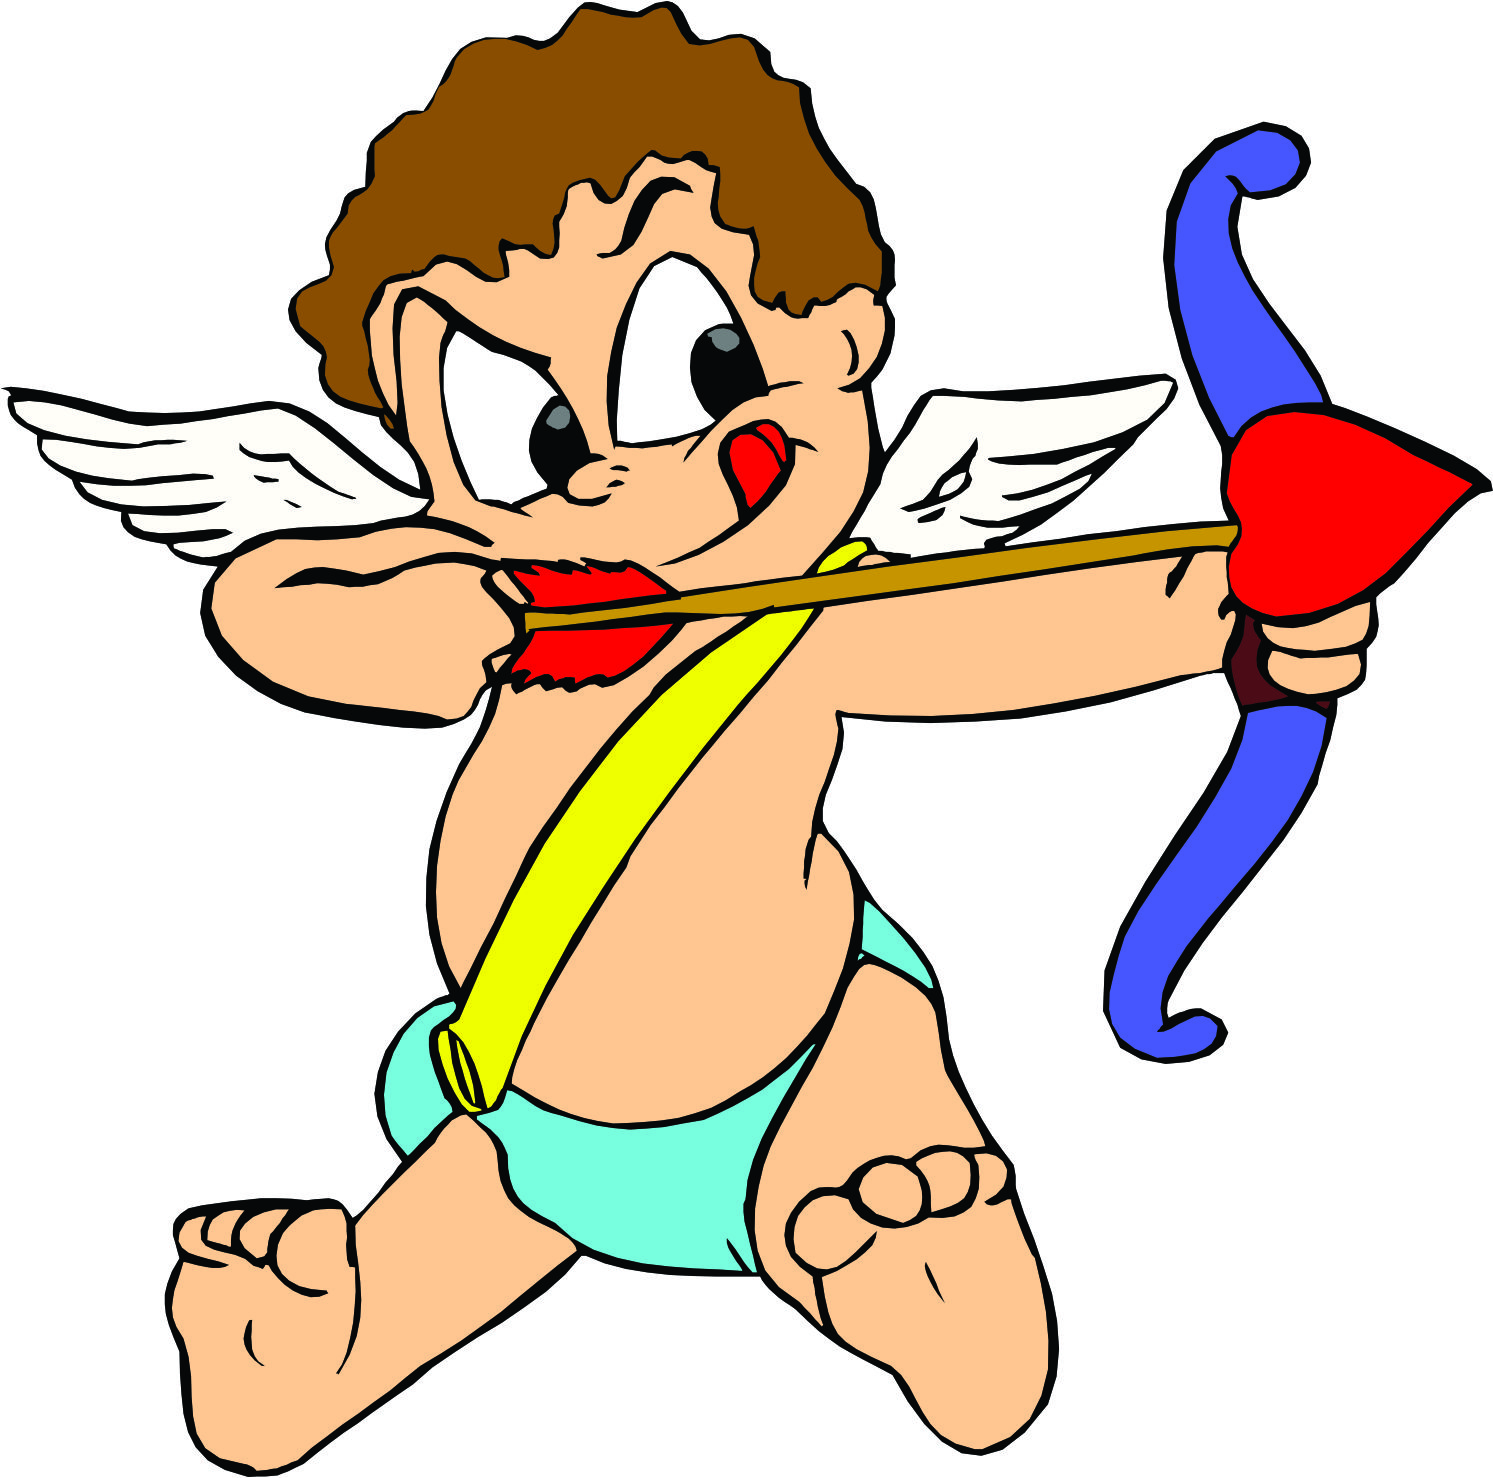 Cupid Clip Art Free Download | Clipart Panda - Free Clipart Images